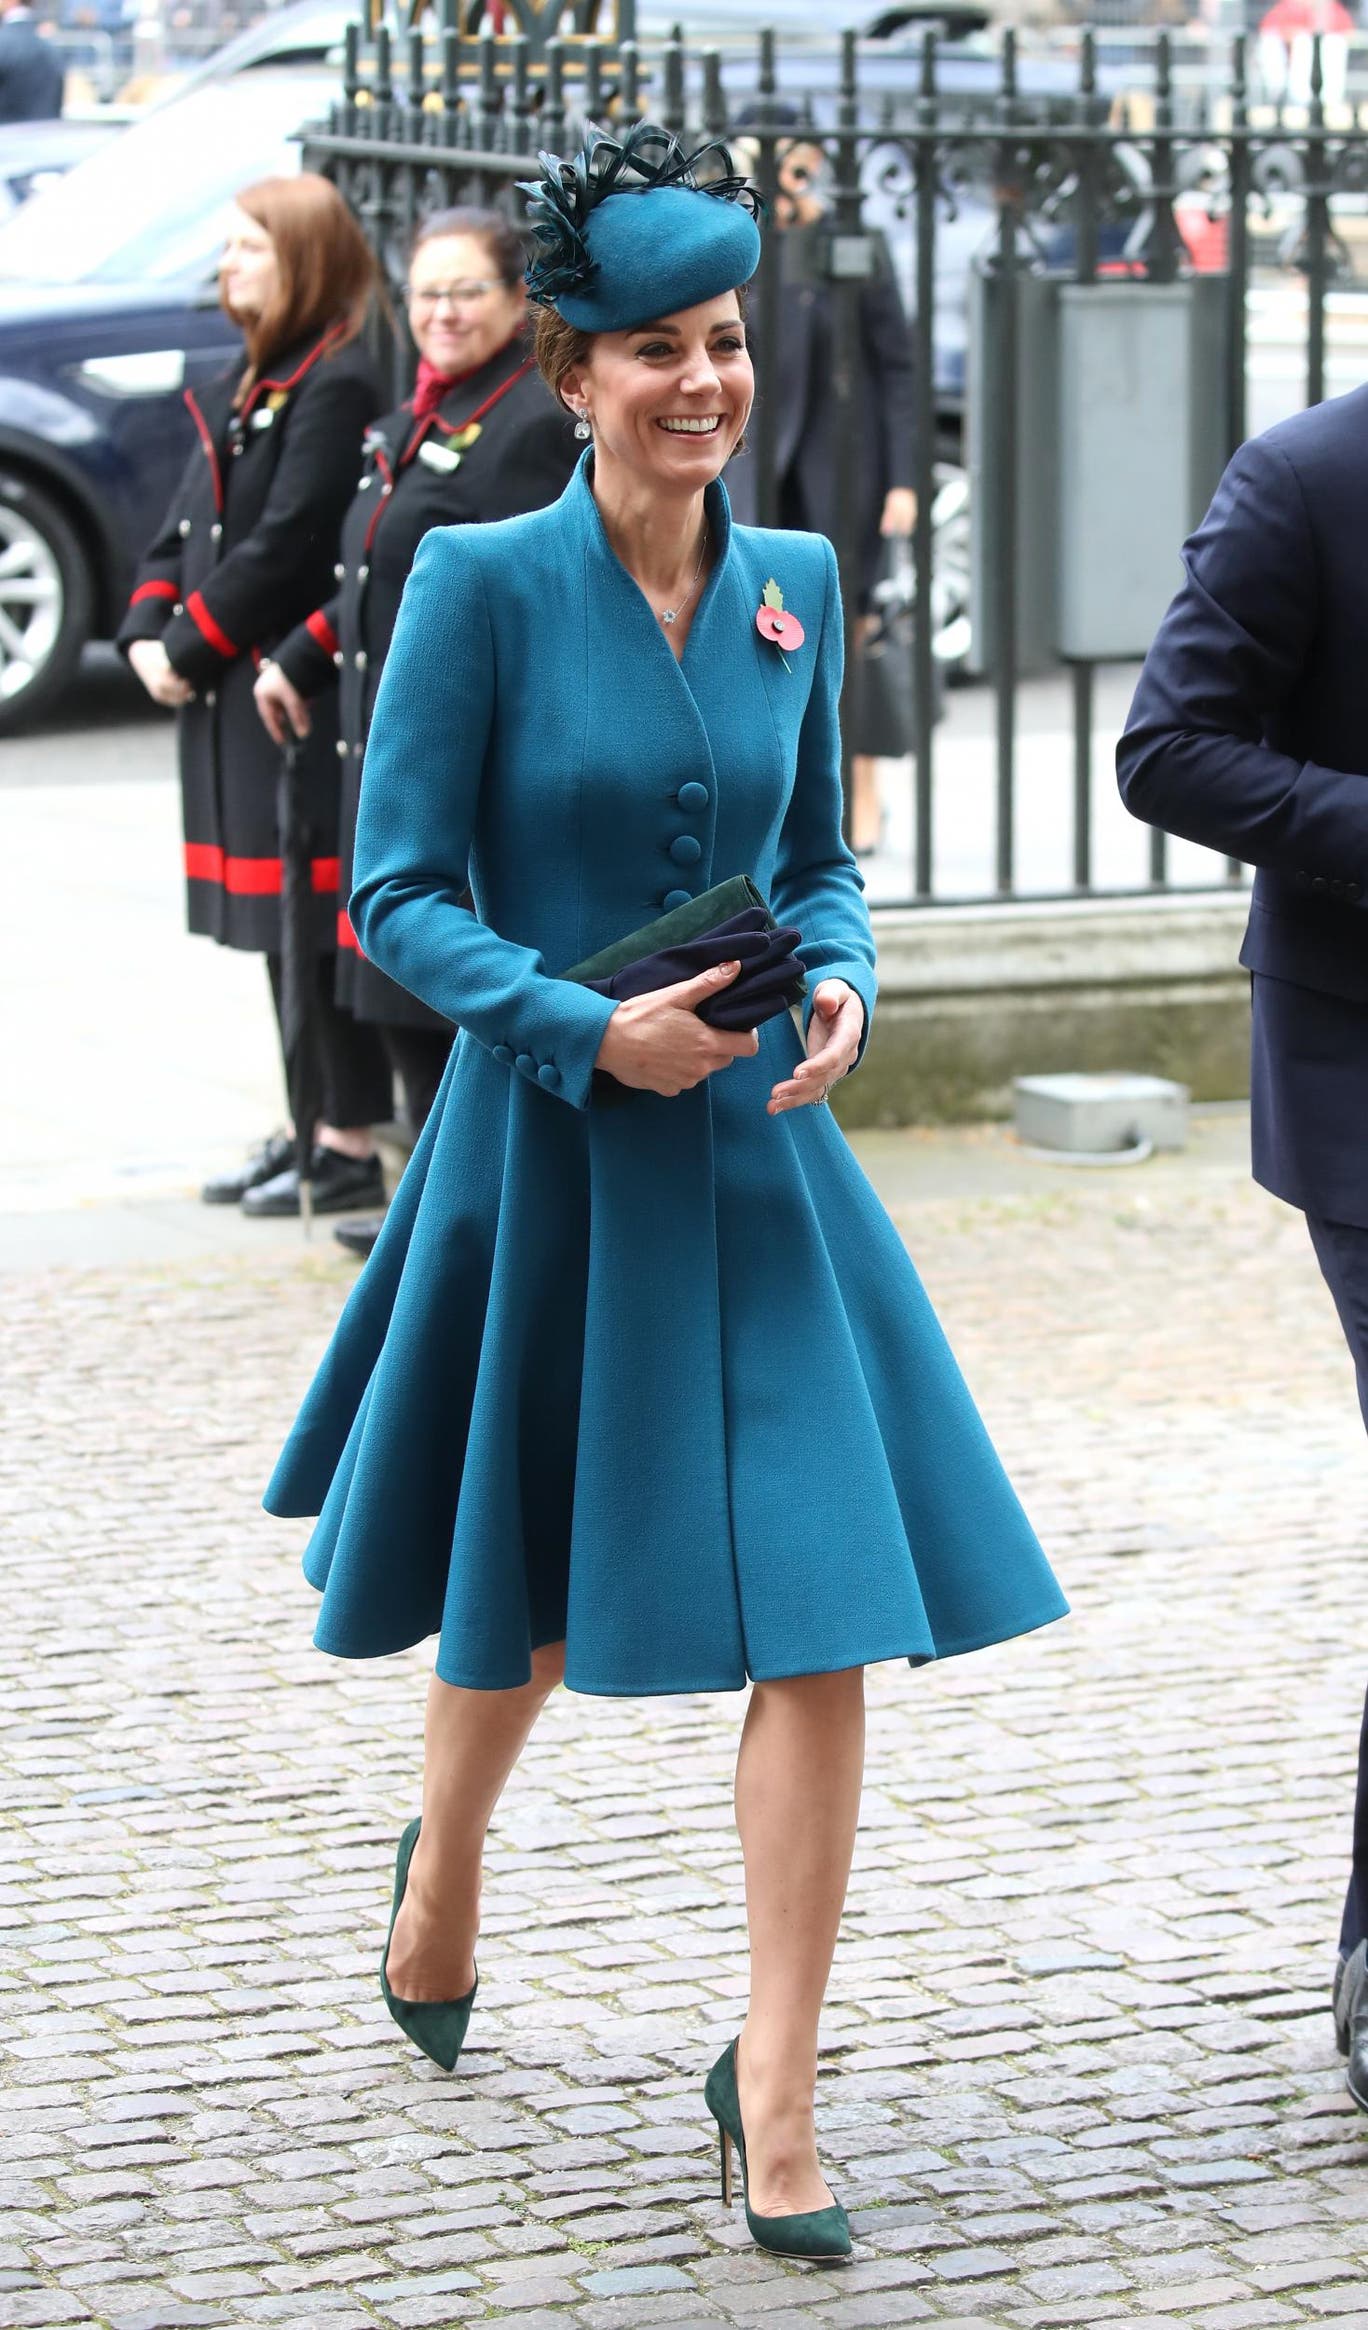 Kate arrived wearing a teal coat